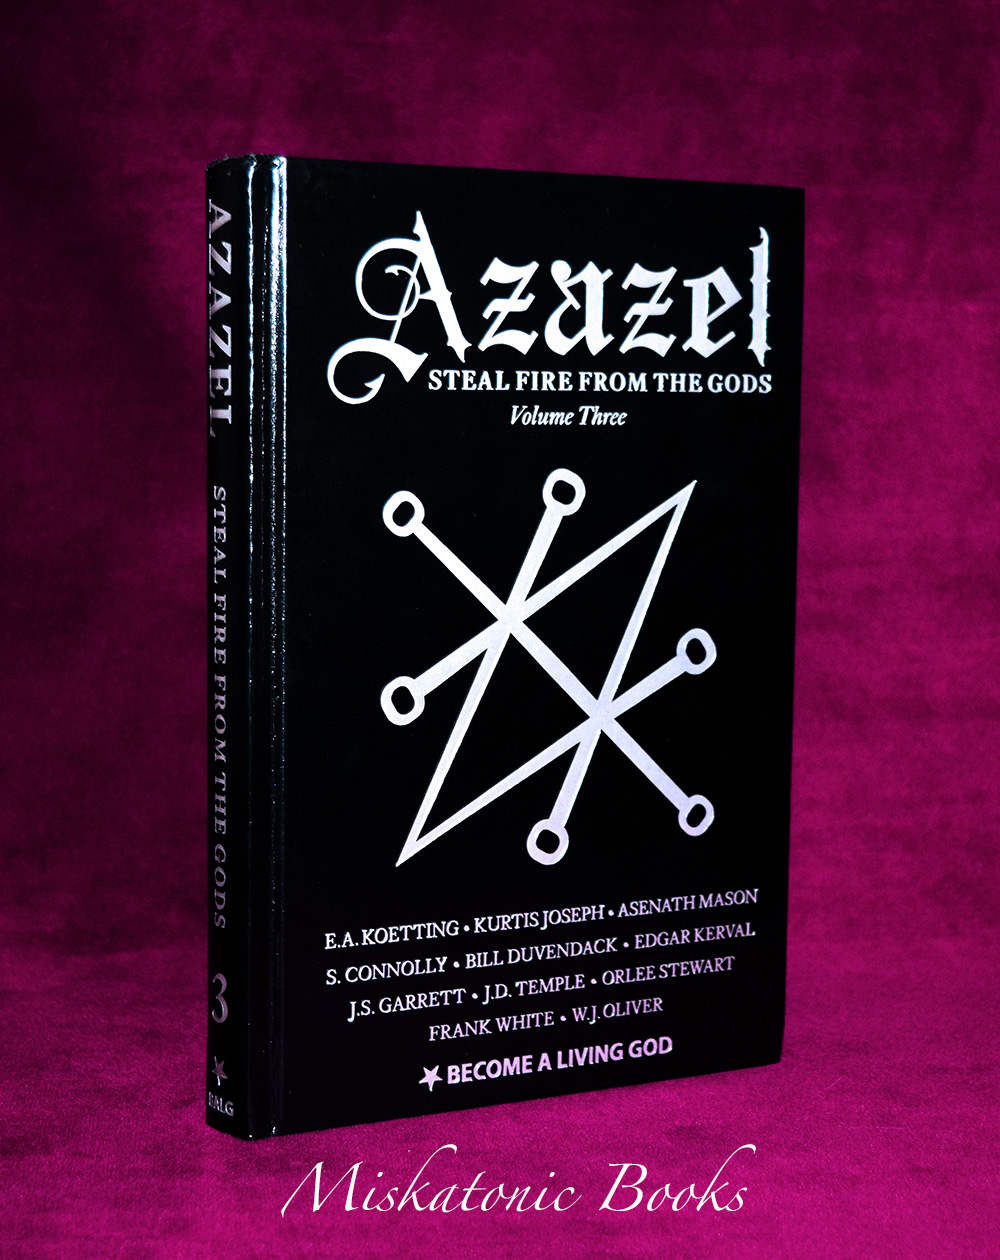 AZAZEL: Steal Fire From The Gods with E.A. Koetting, Asenath Mason, S. Connolly, Edgar Kerval, Bill Duvendack and more - Deluxe Signed Leather Bound Limited Edition